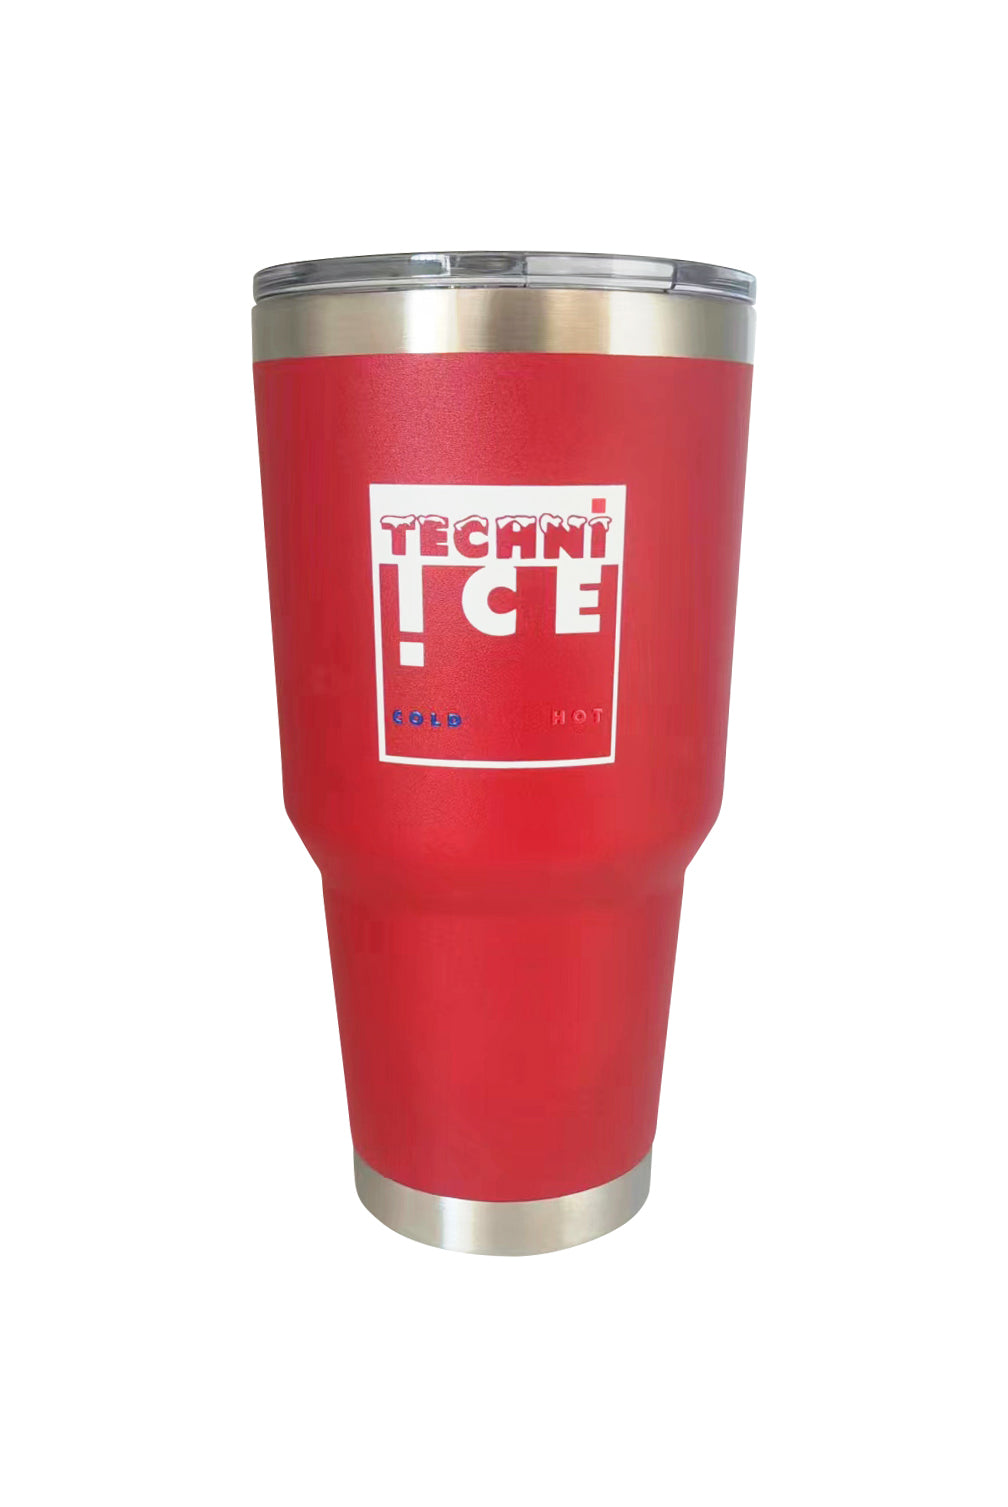 New 2024 Model Techni Ice 1200ml (40 oz.) Tumbler Red Stainless Steel 6 Years Warranty *FRESH STOCK JUST ARRIVED